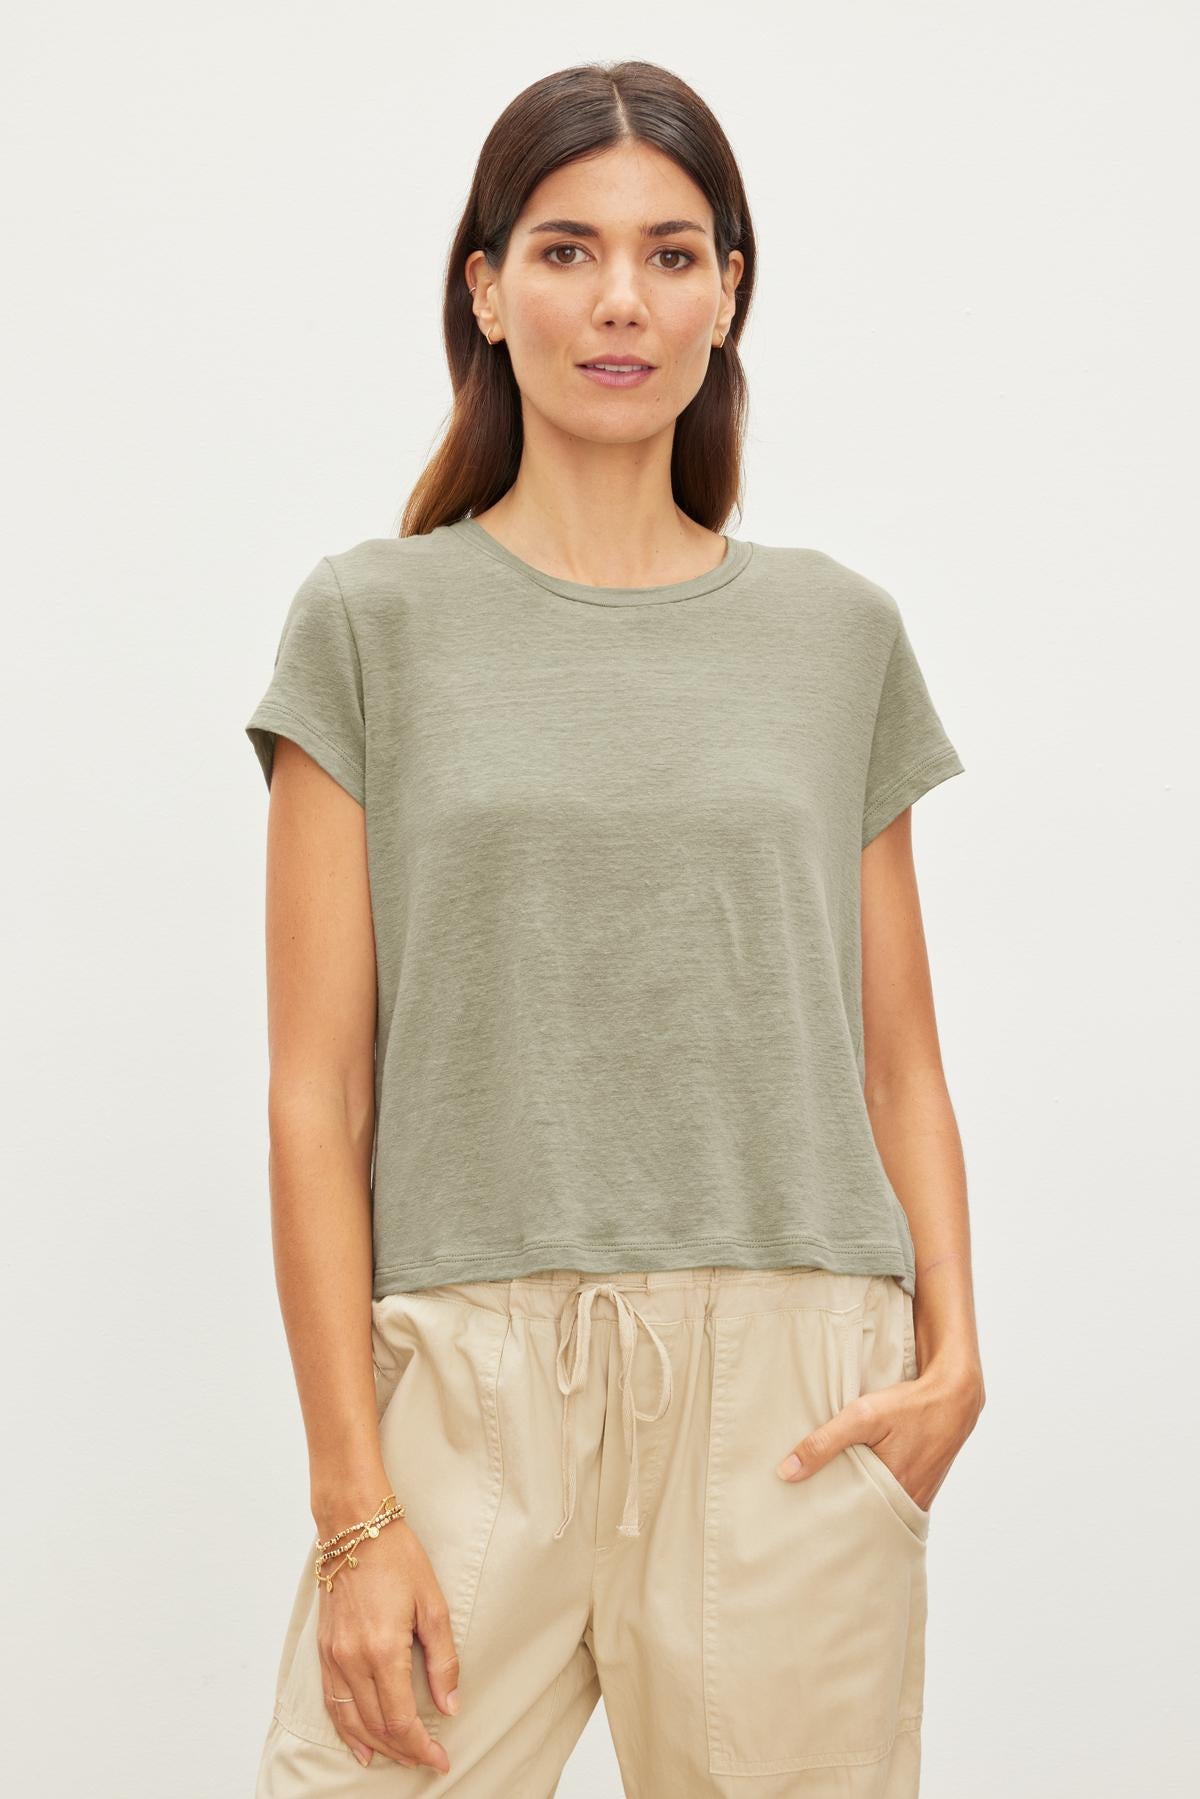   A woman wearing a green Velvet by Graham & Spencer CASEY LINEN KNIT CREW NECK TEE and beige drawstring pants stands against a plain background, looking directly at the camera. 